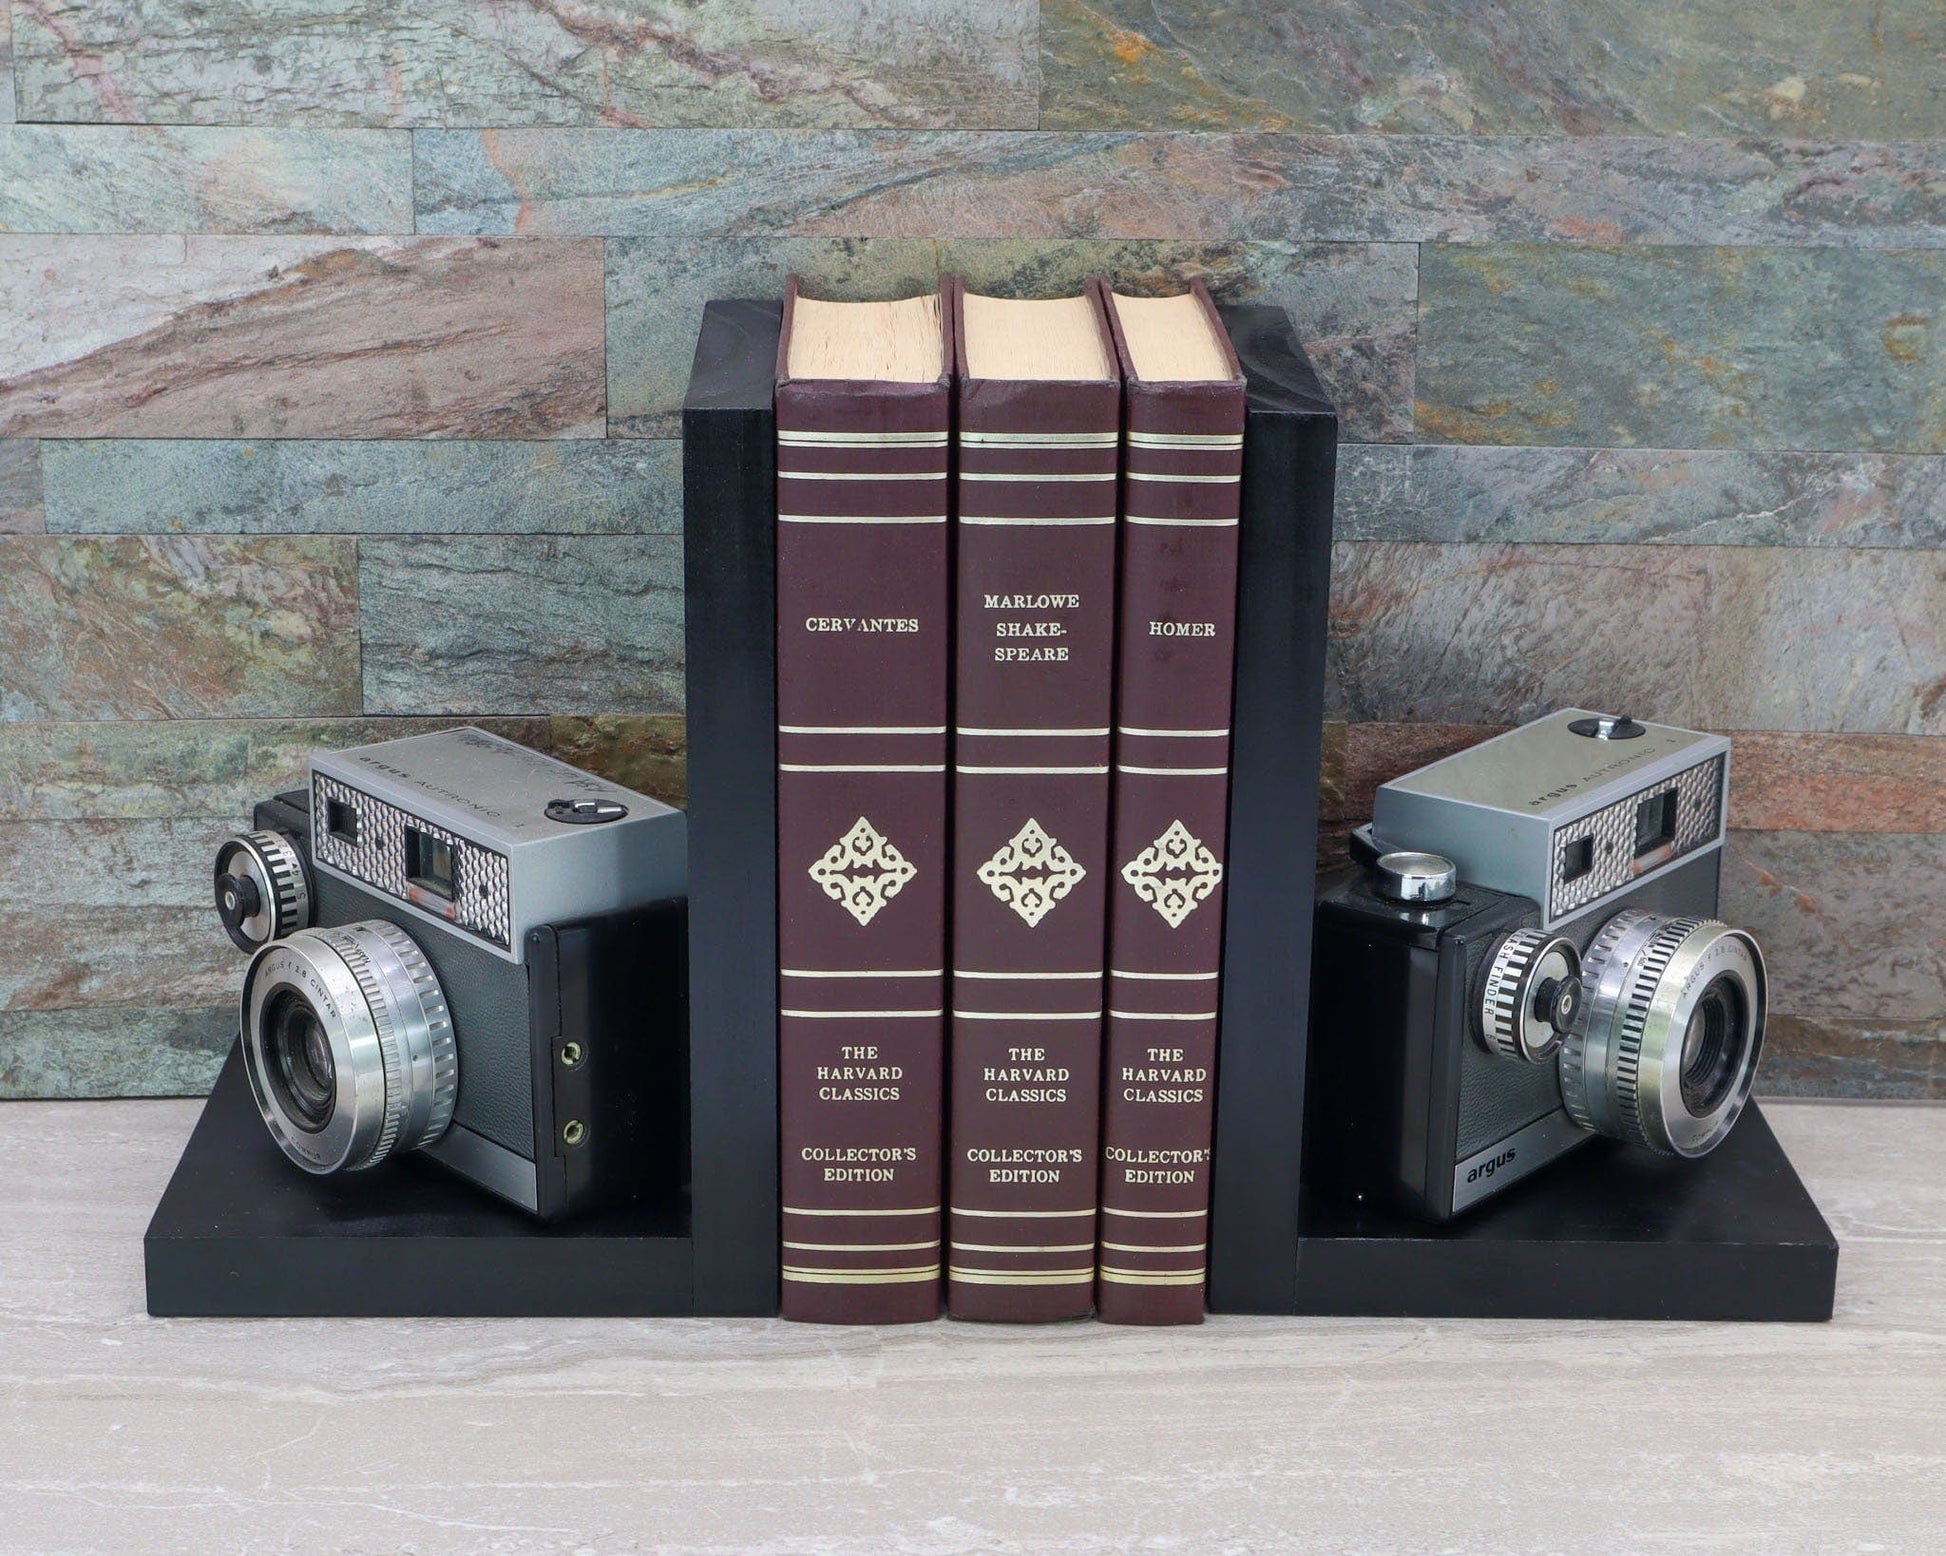 LightAndTimeArt Bookends Antique Decorative Camera Bookends, Argus Autronic, Home Theater Décor, Movie Room, DVD Holder, Vintage, Ecofriendly Gift